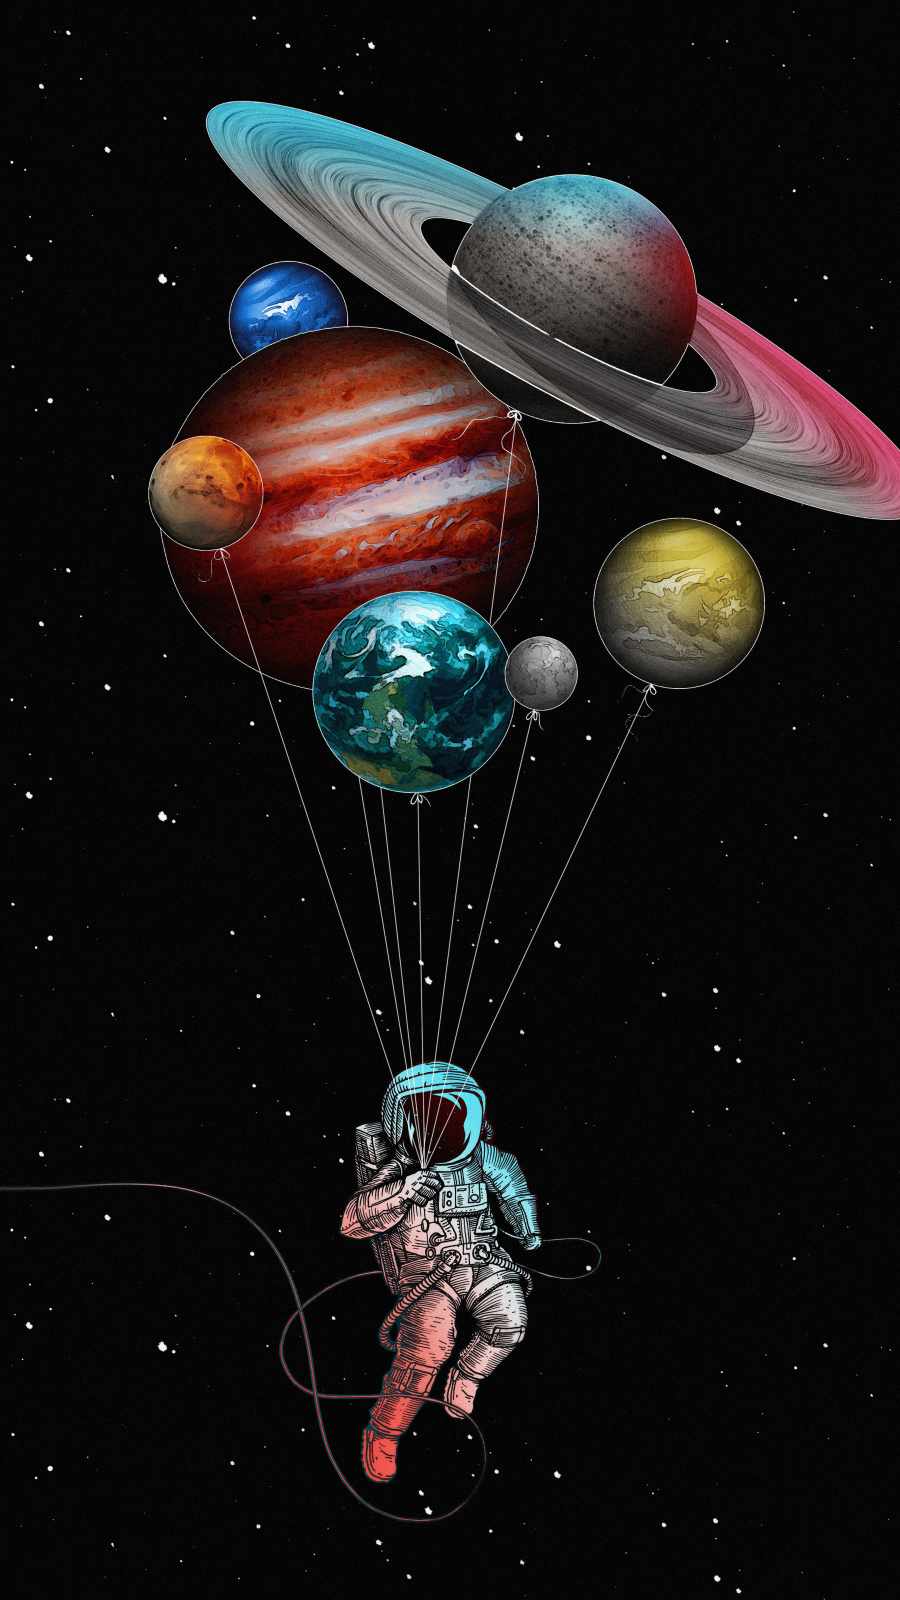 Space Planet Balloons iPhone Wallpaper